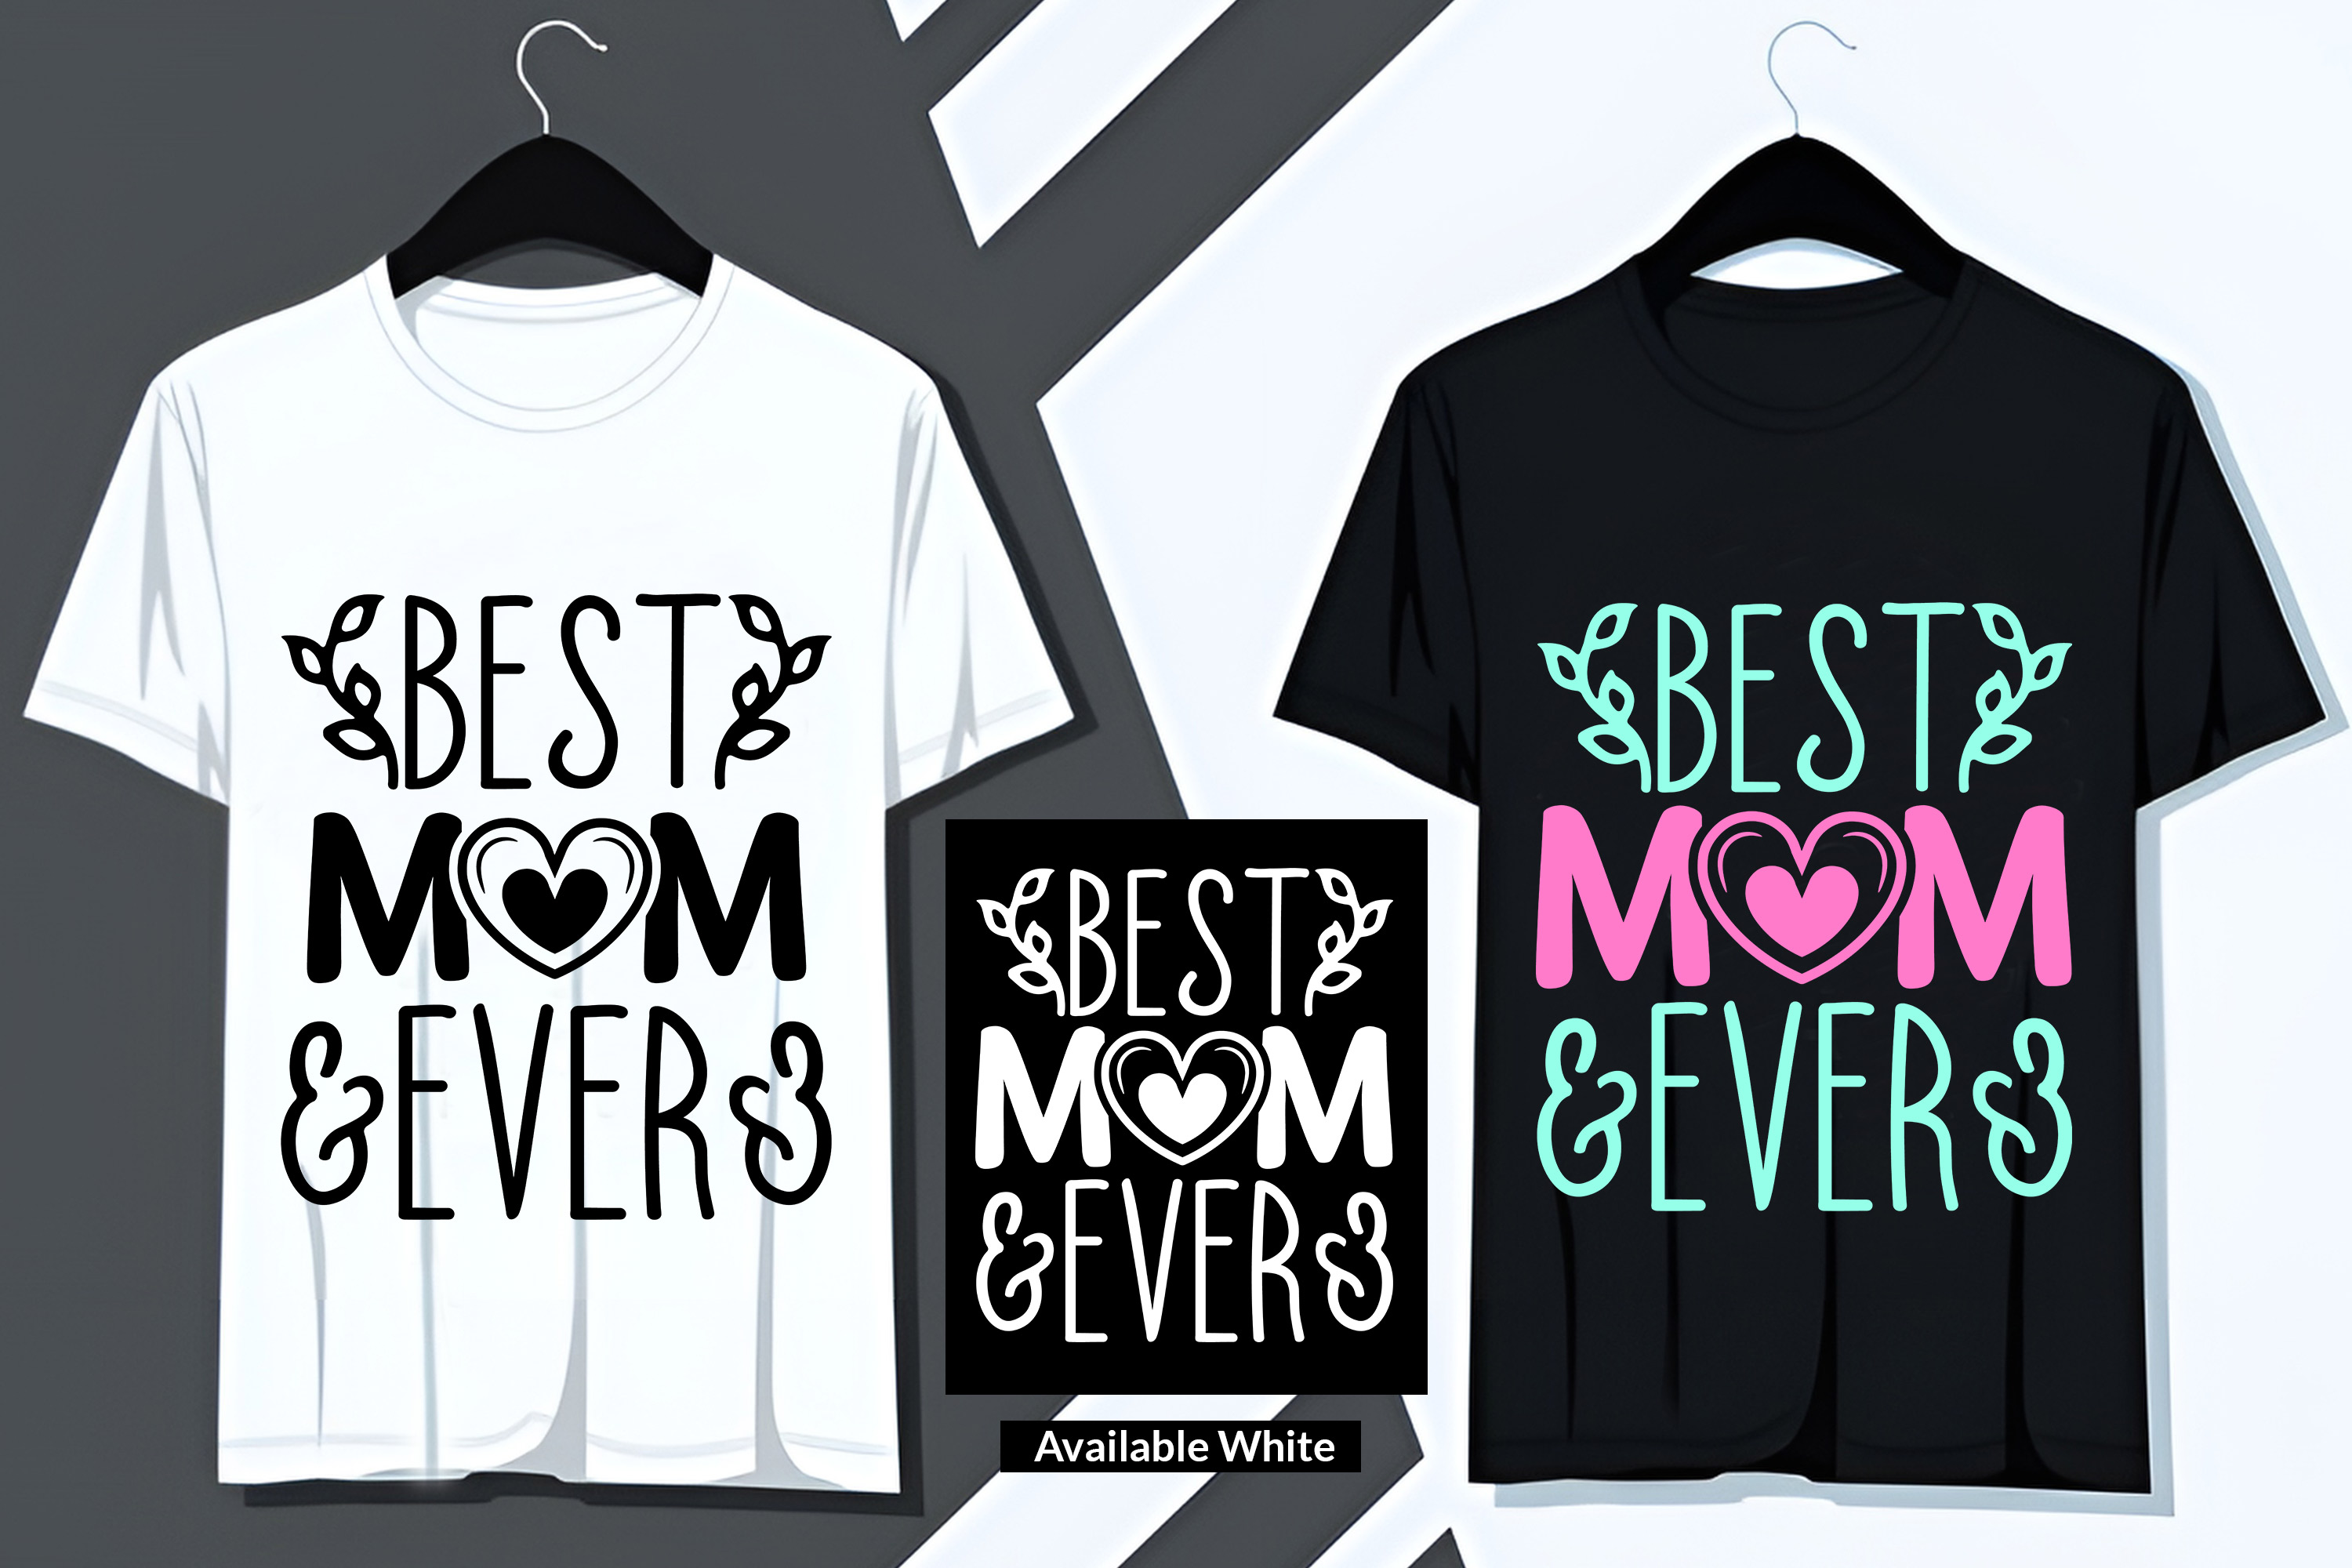 Two t - shirts with the words best mom ever and best mom ever.